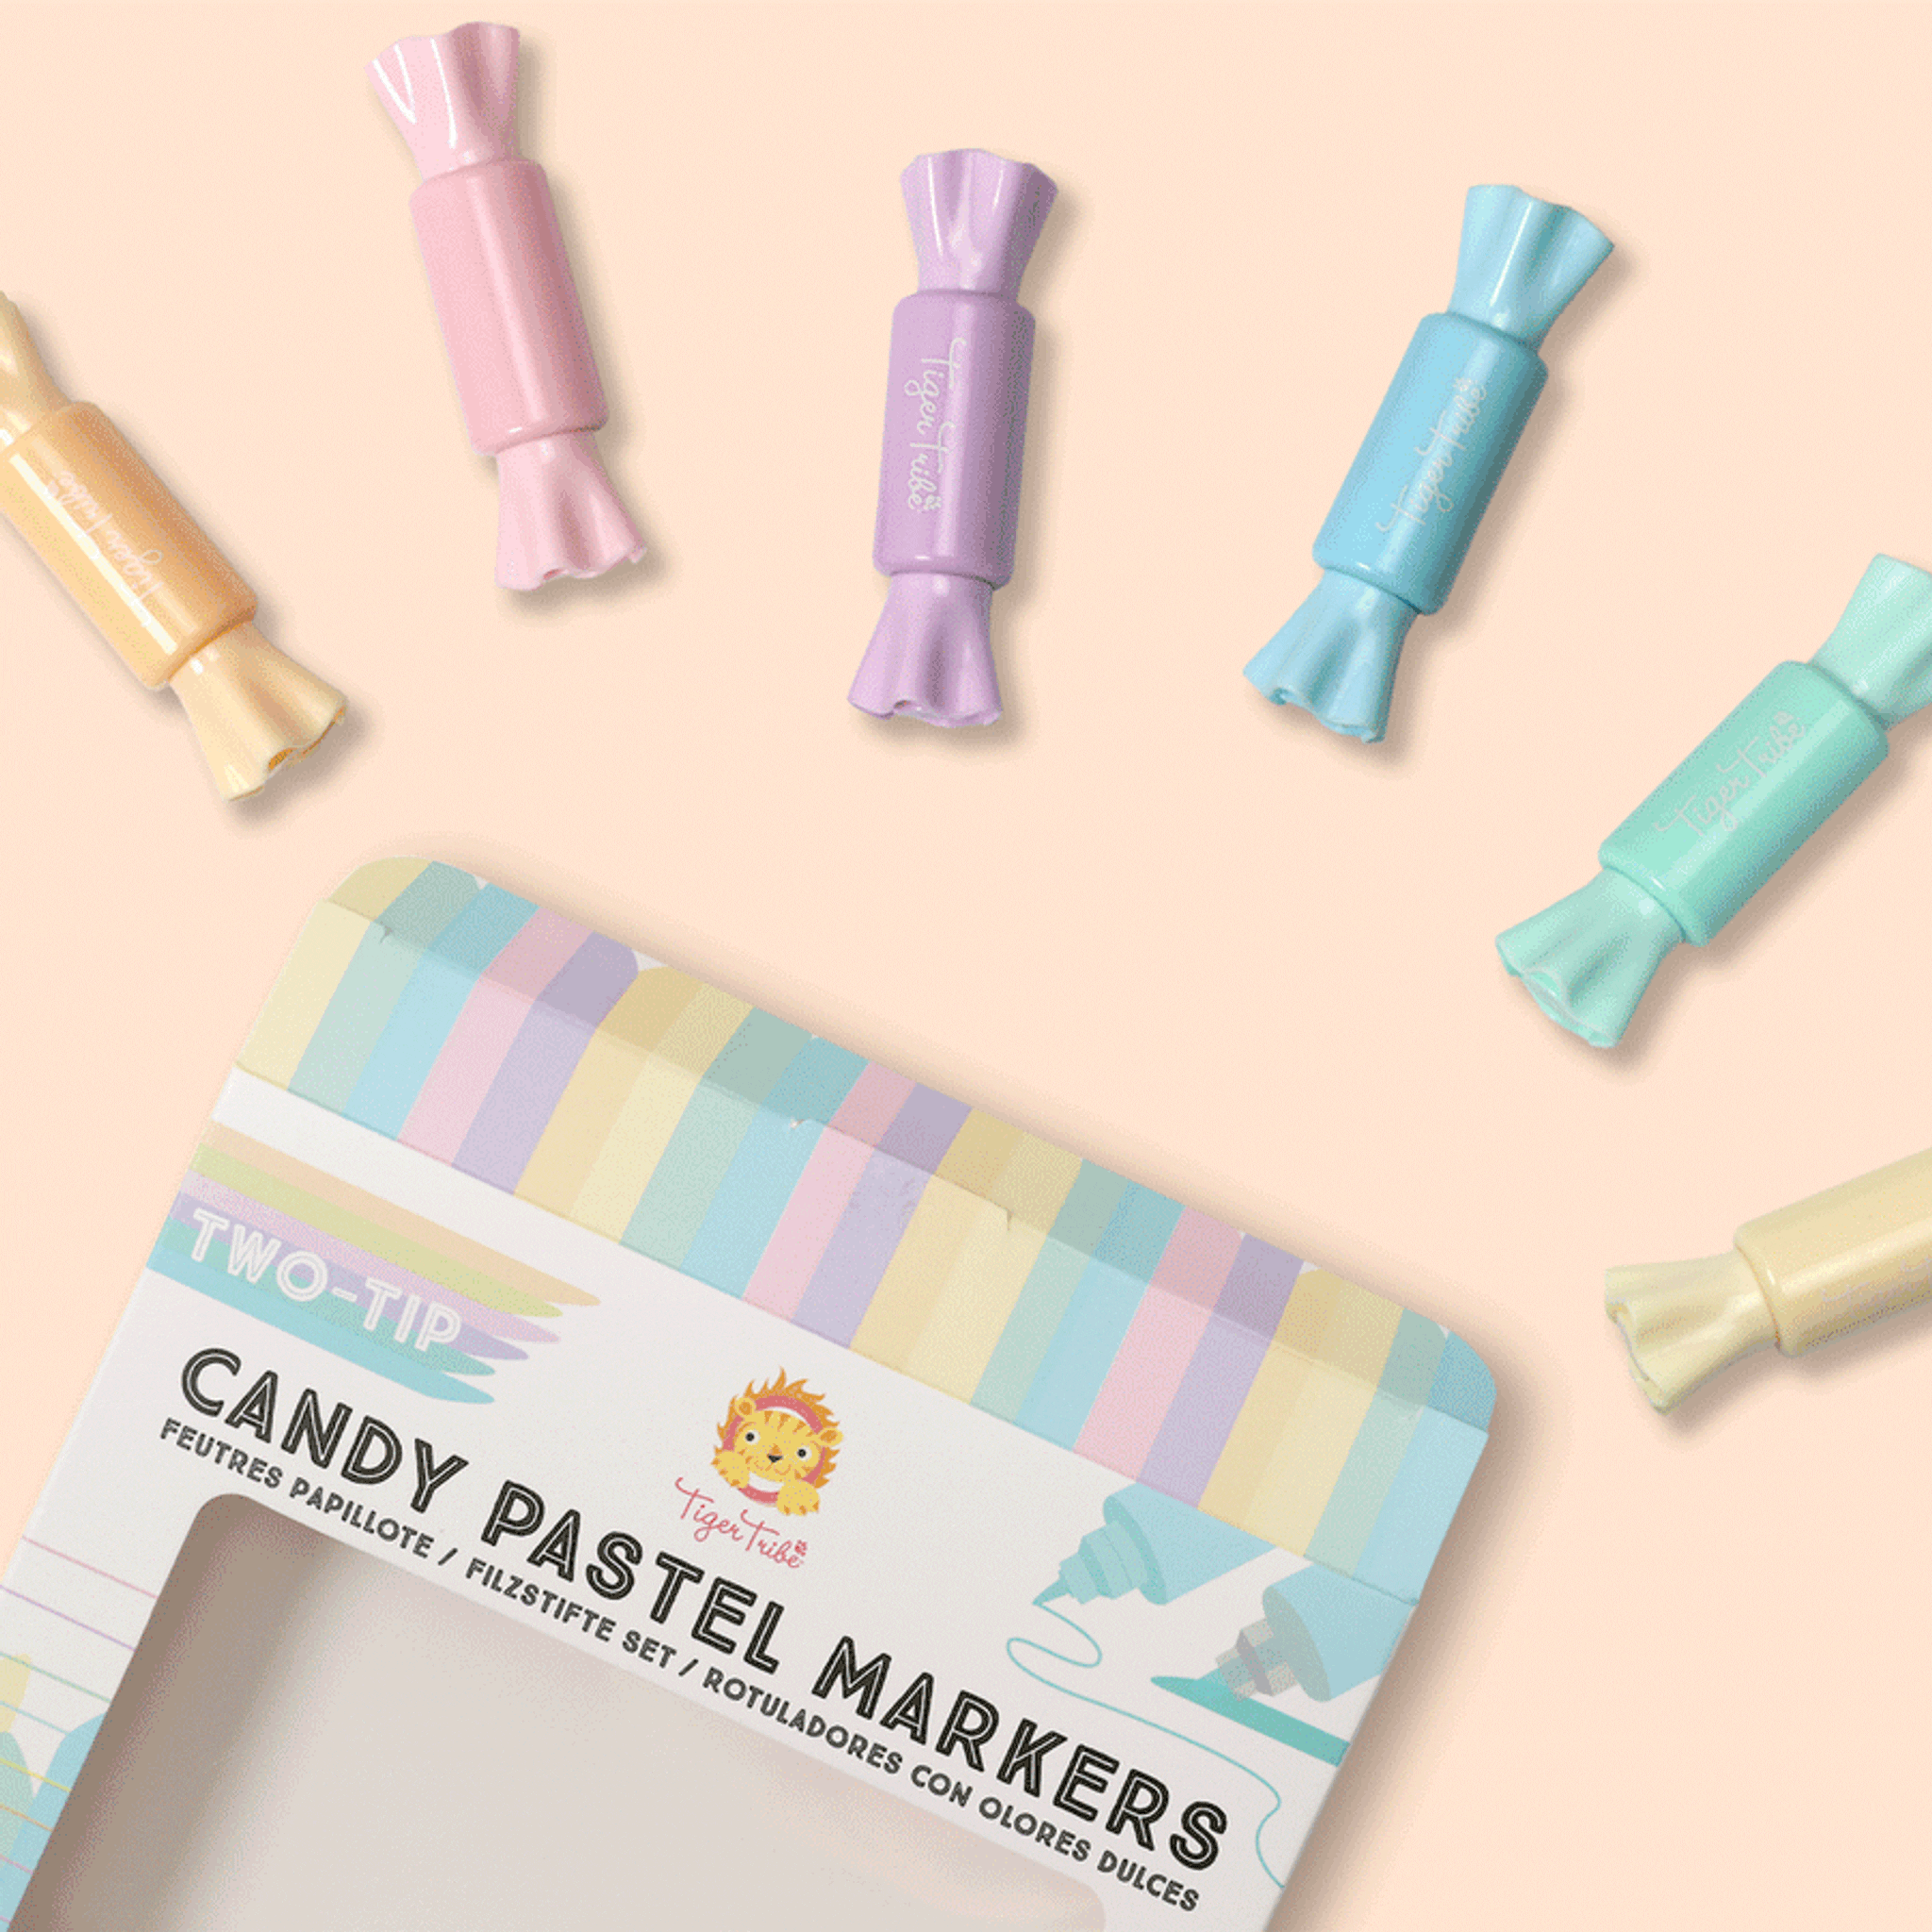 Two-Tip Candy Pastel Markers - Toybox Tales